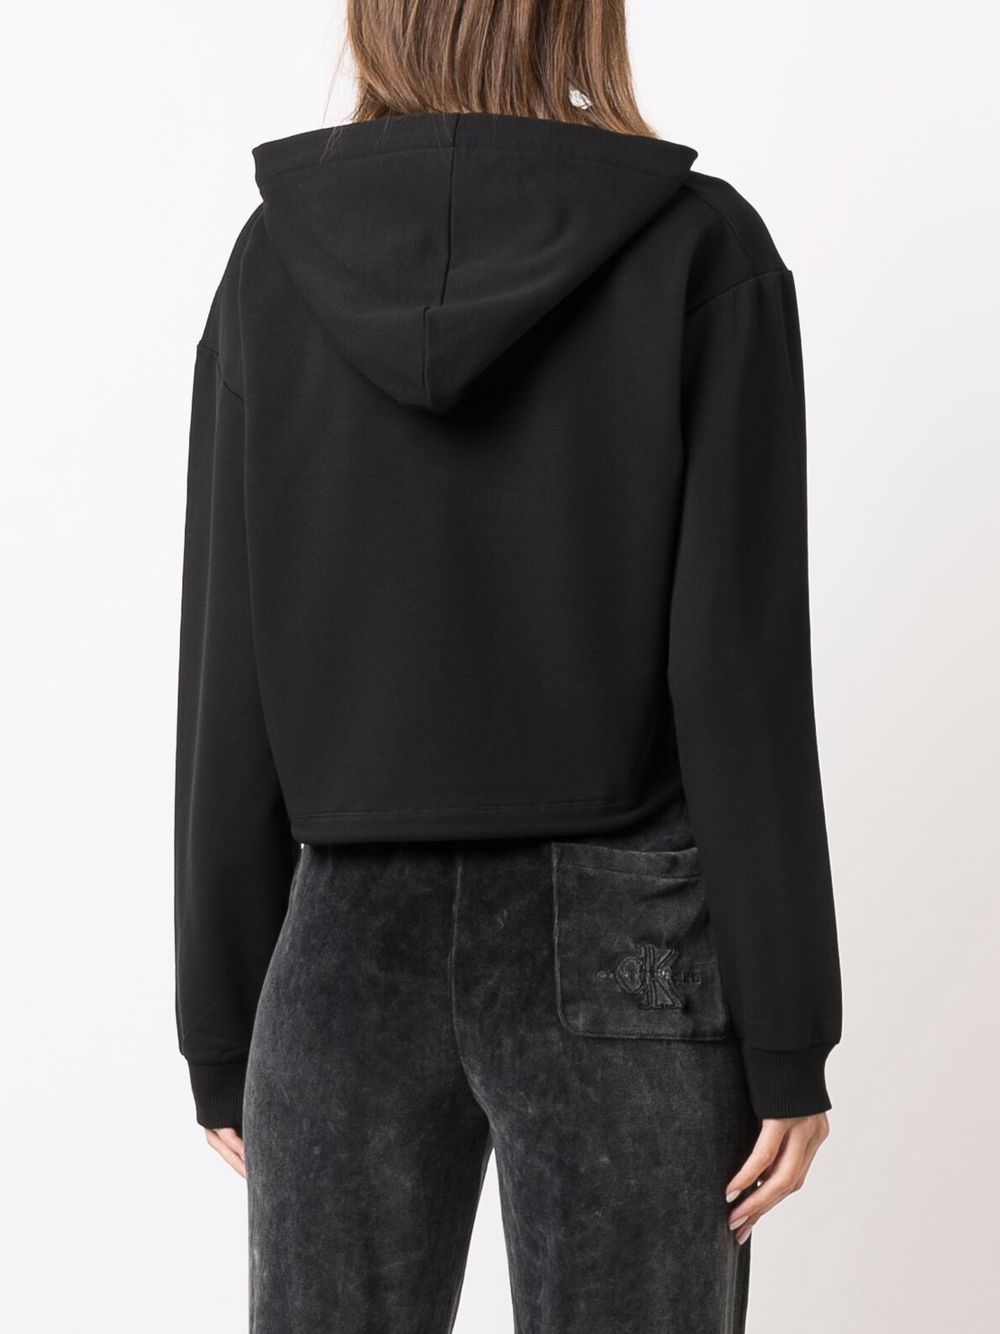 Shop Calvin Klein logo-debossed cotton hoodie with Express Delivery ...